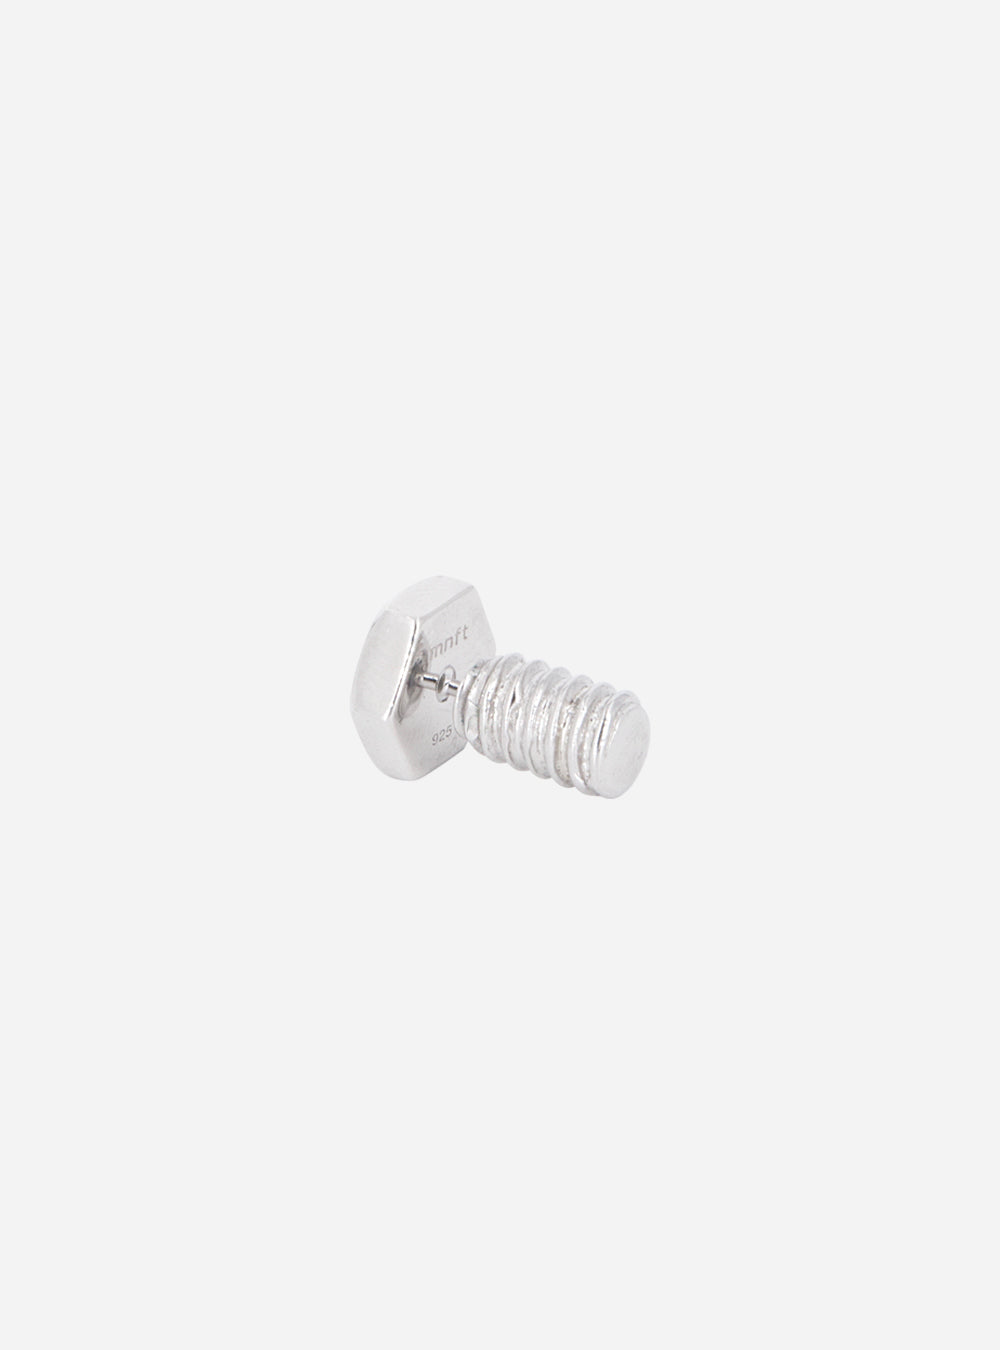 a MIDNIGHTFACTORY Hex-bolt lab-grown diamond earring on a white background.